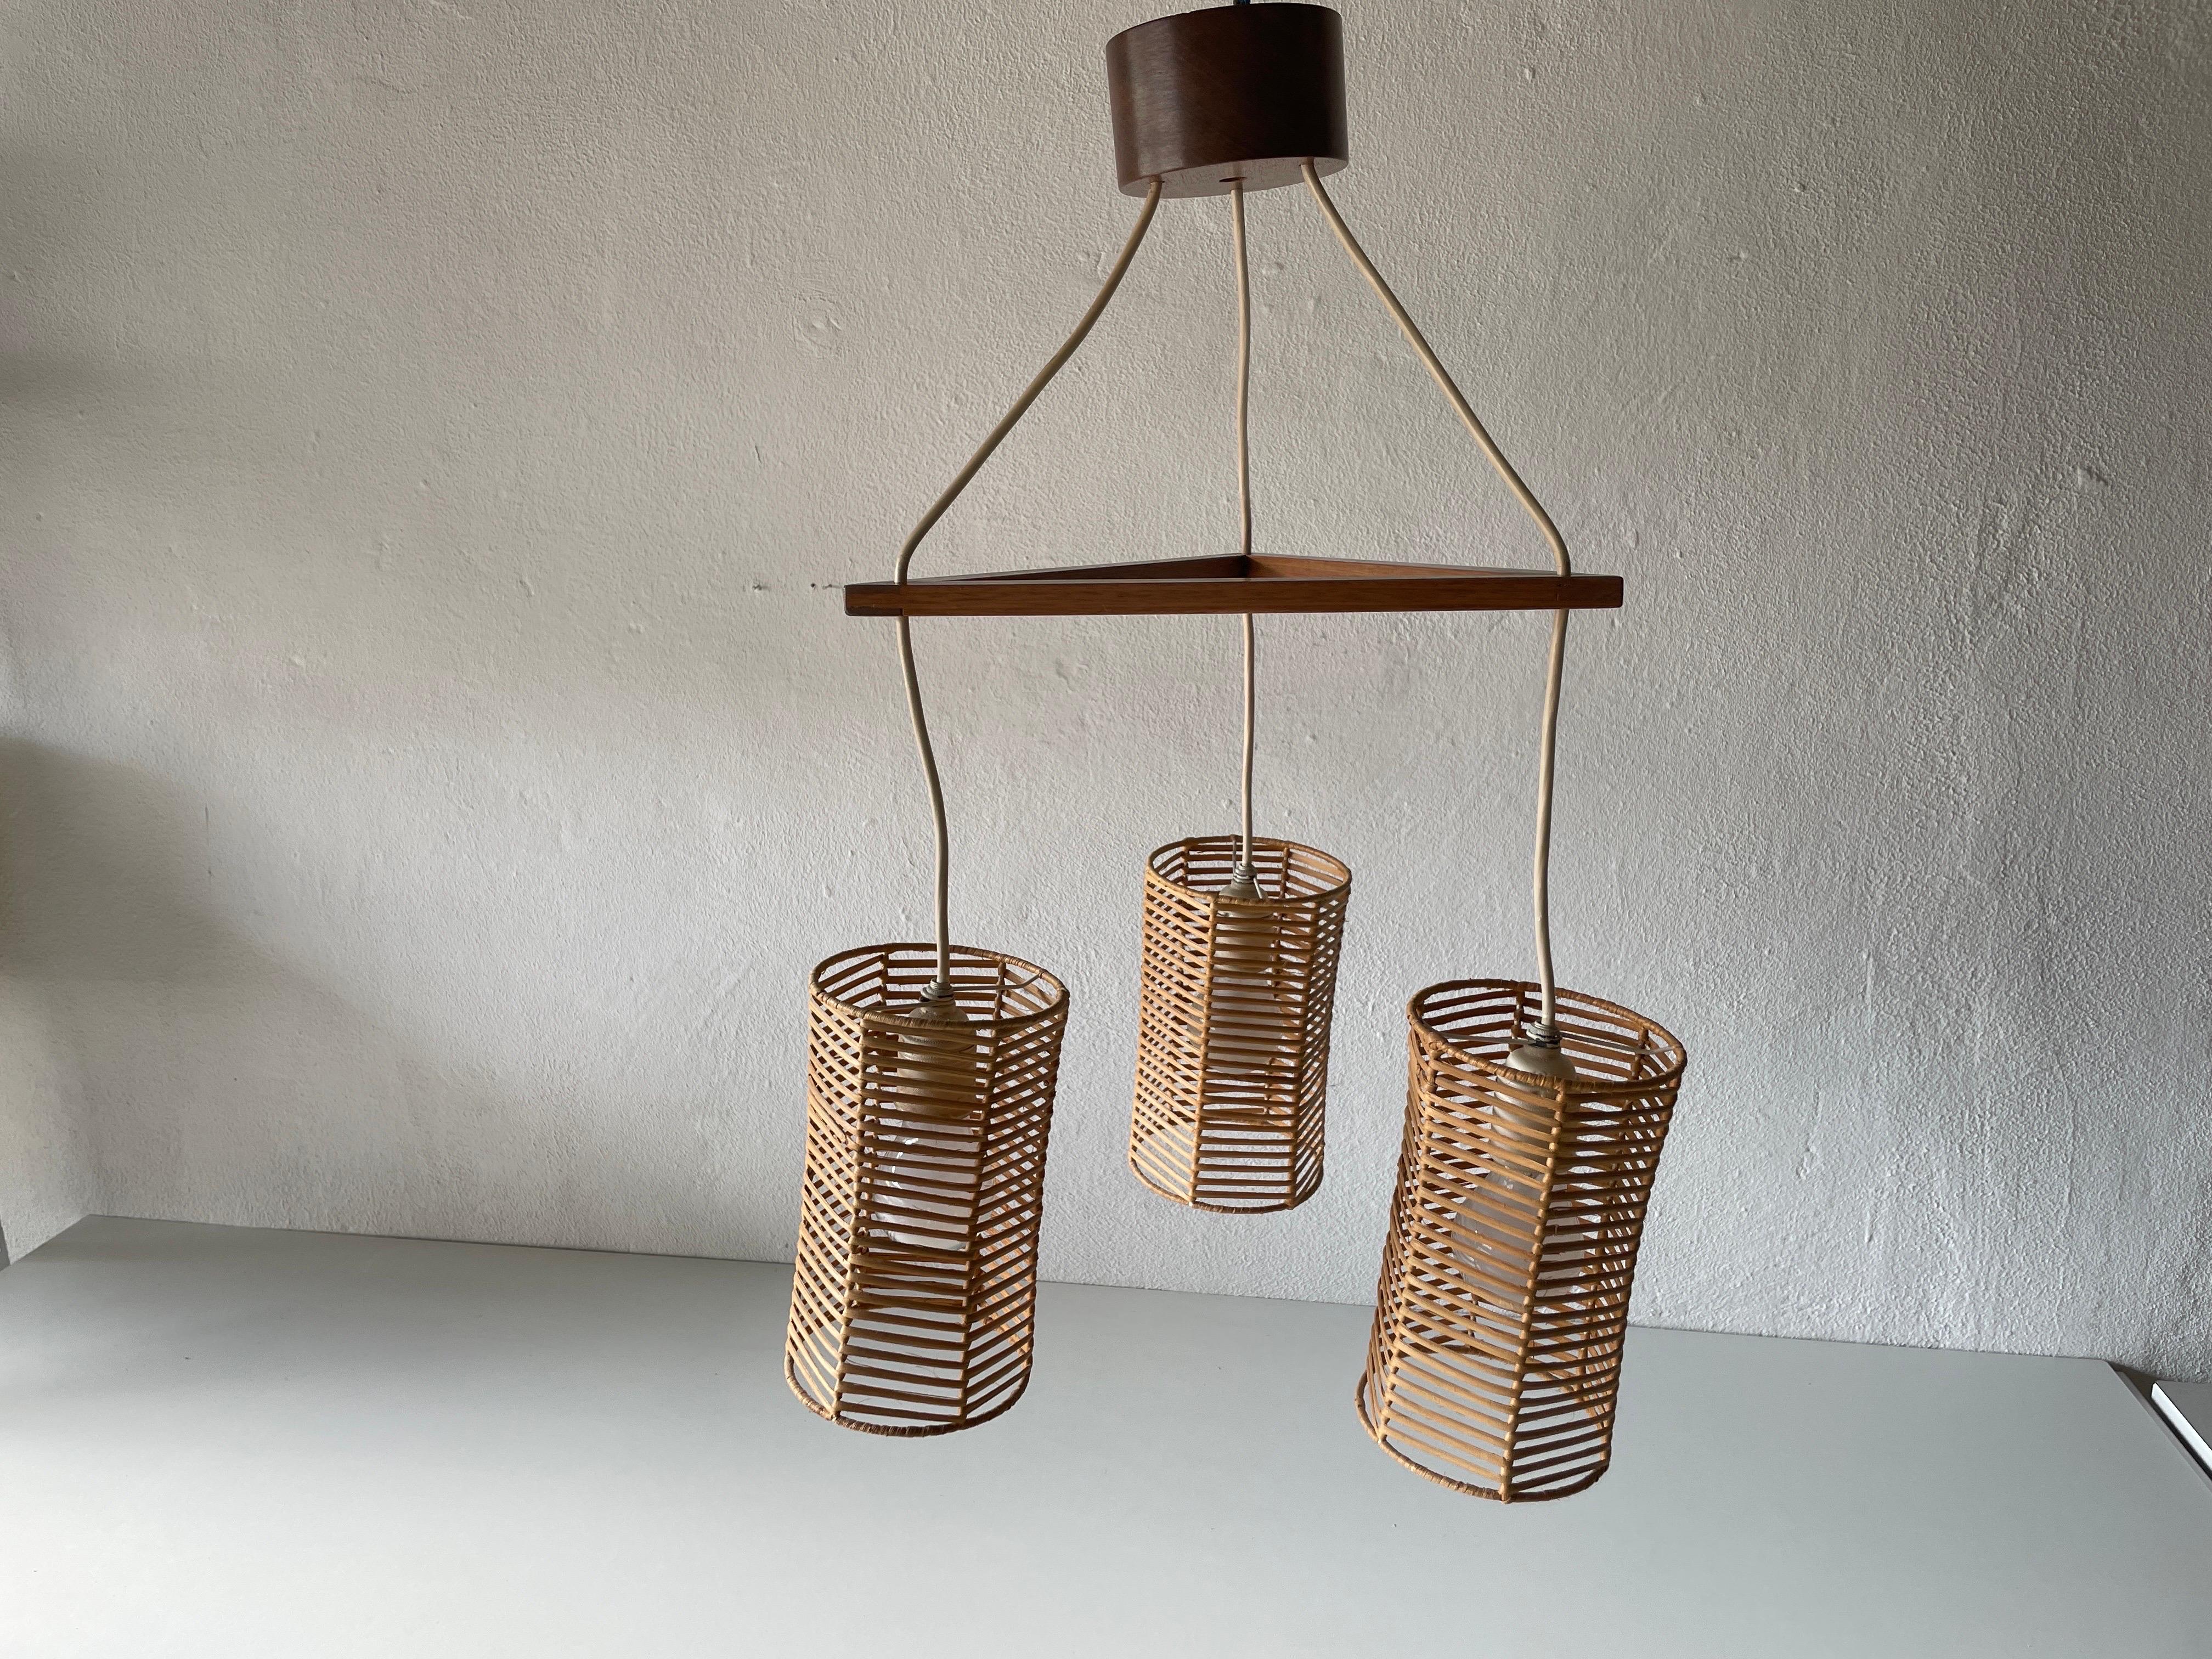 Triple Shade Wicker and Wood Pendant Lamp, 1960s, Germany For Sale 4